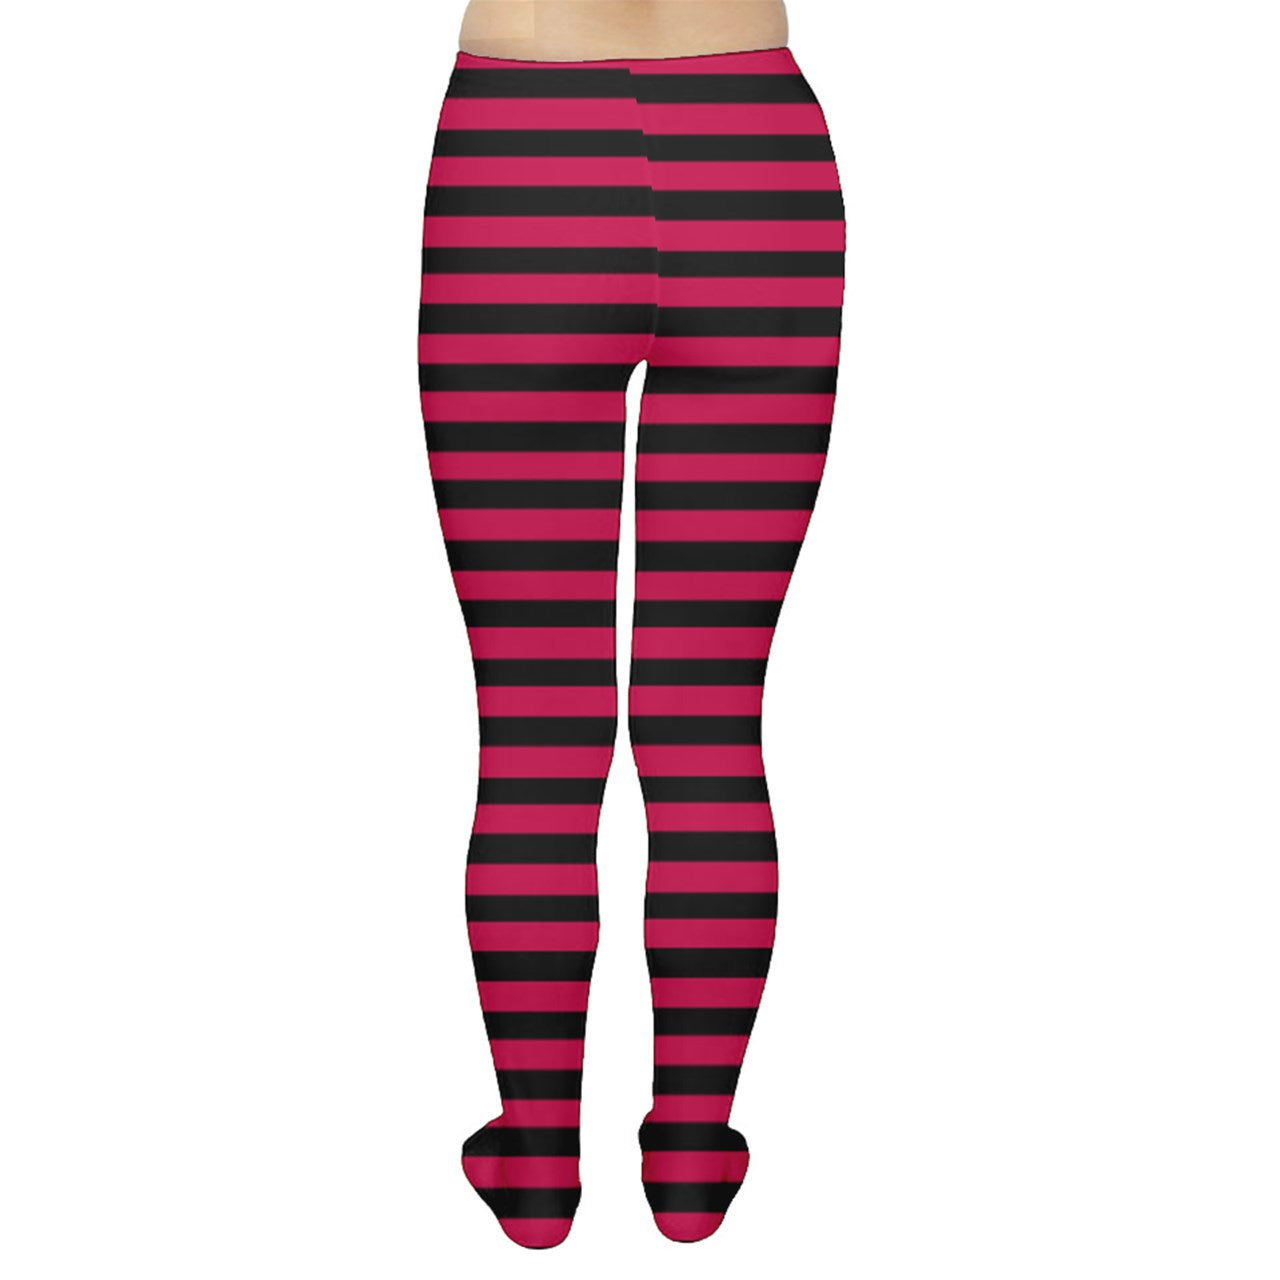 Cherry Red Stripes Tights